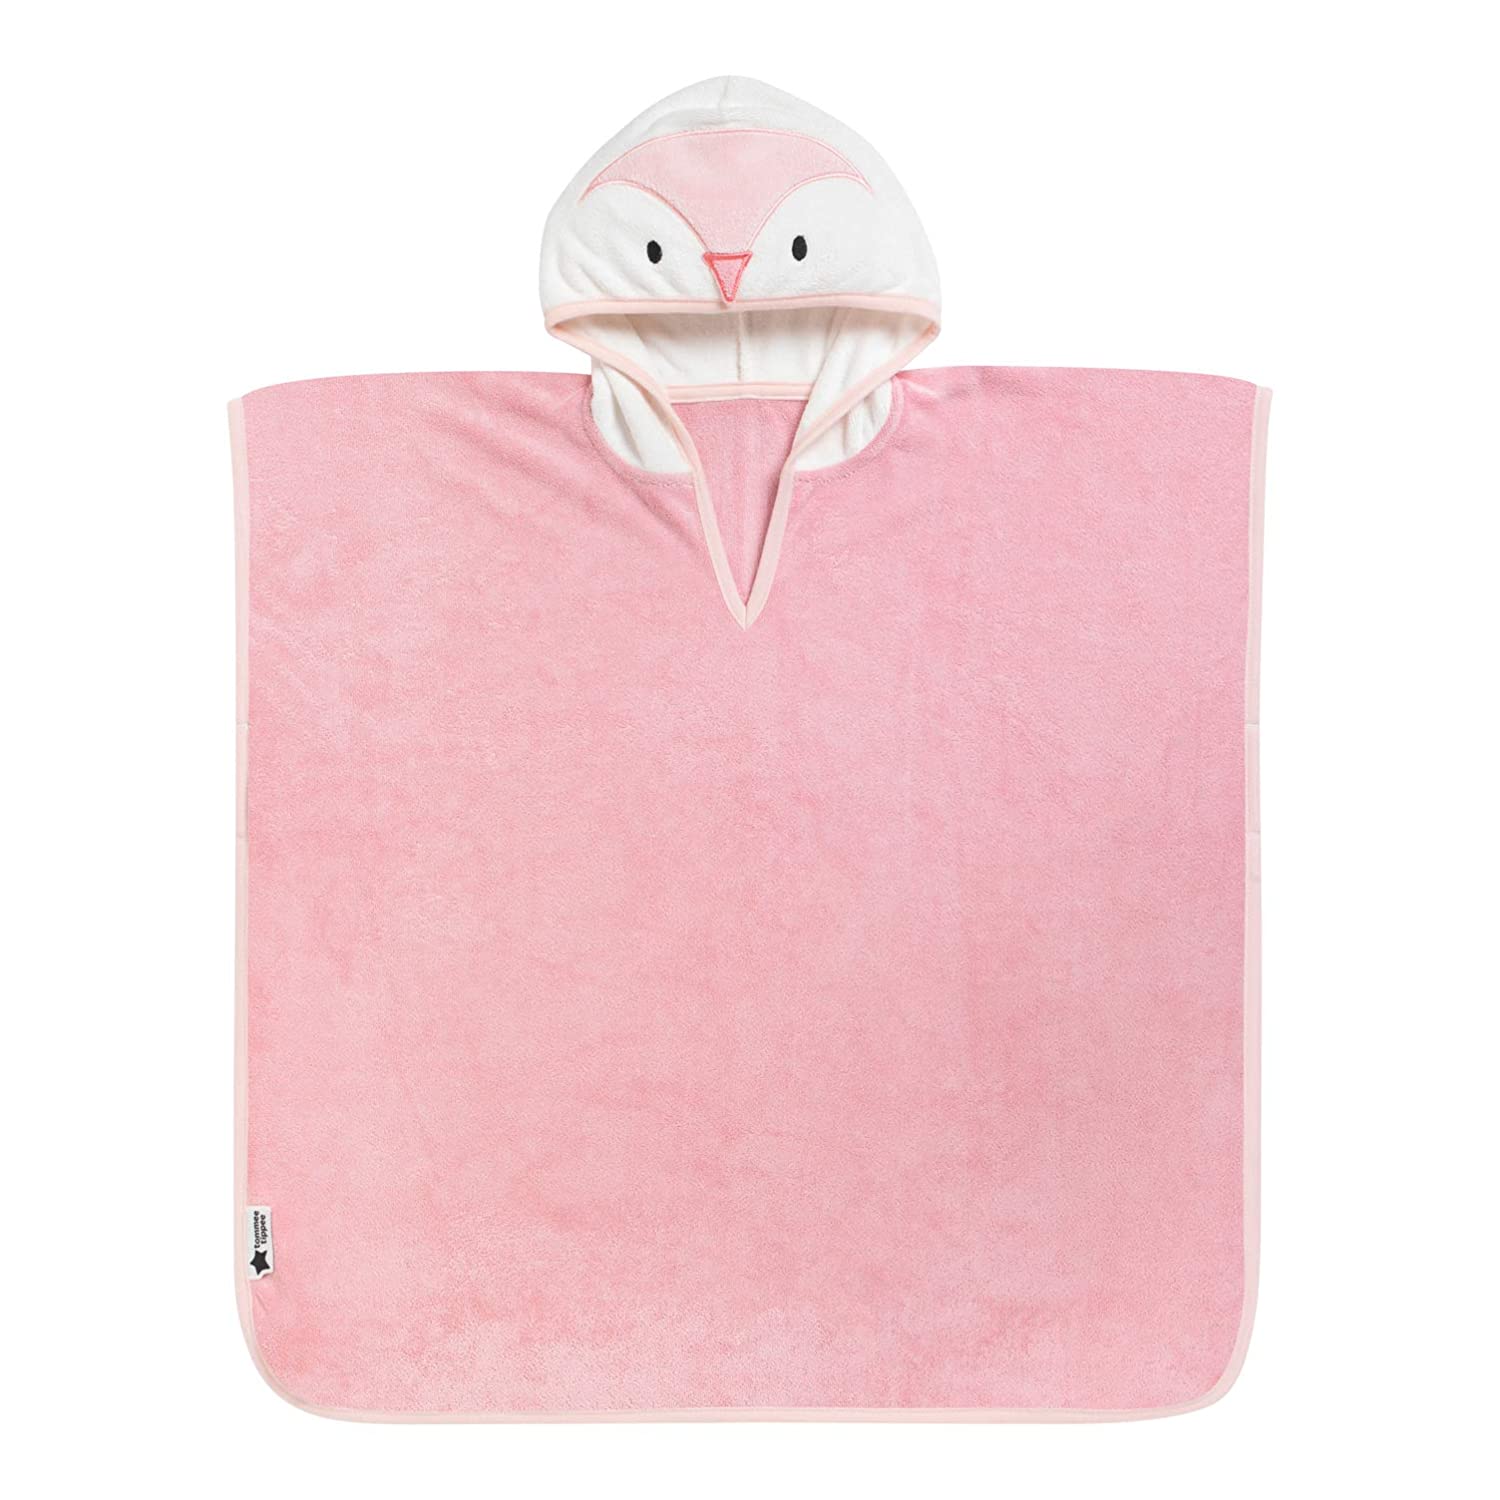 Tommee Tippee Splashtime Range - Hooded Poncho 2-4 Years Penny the Penguin Pink